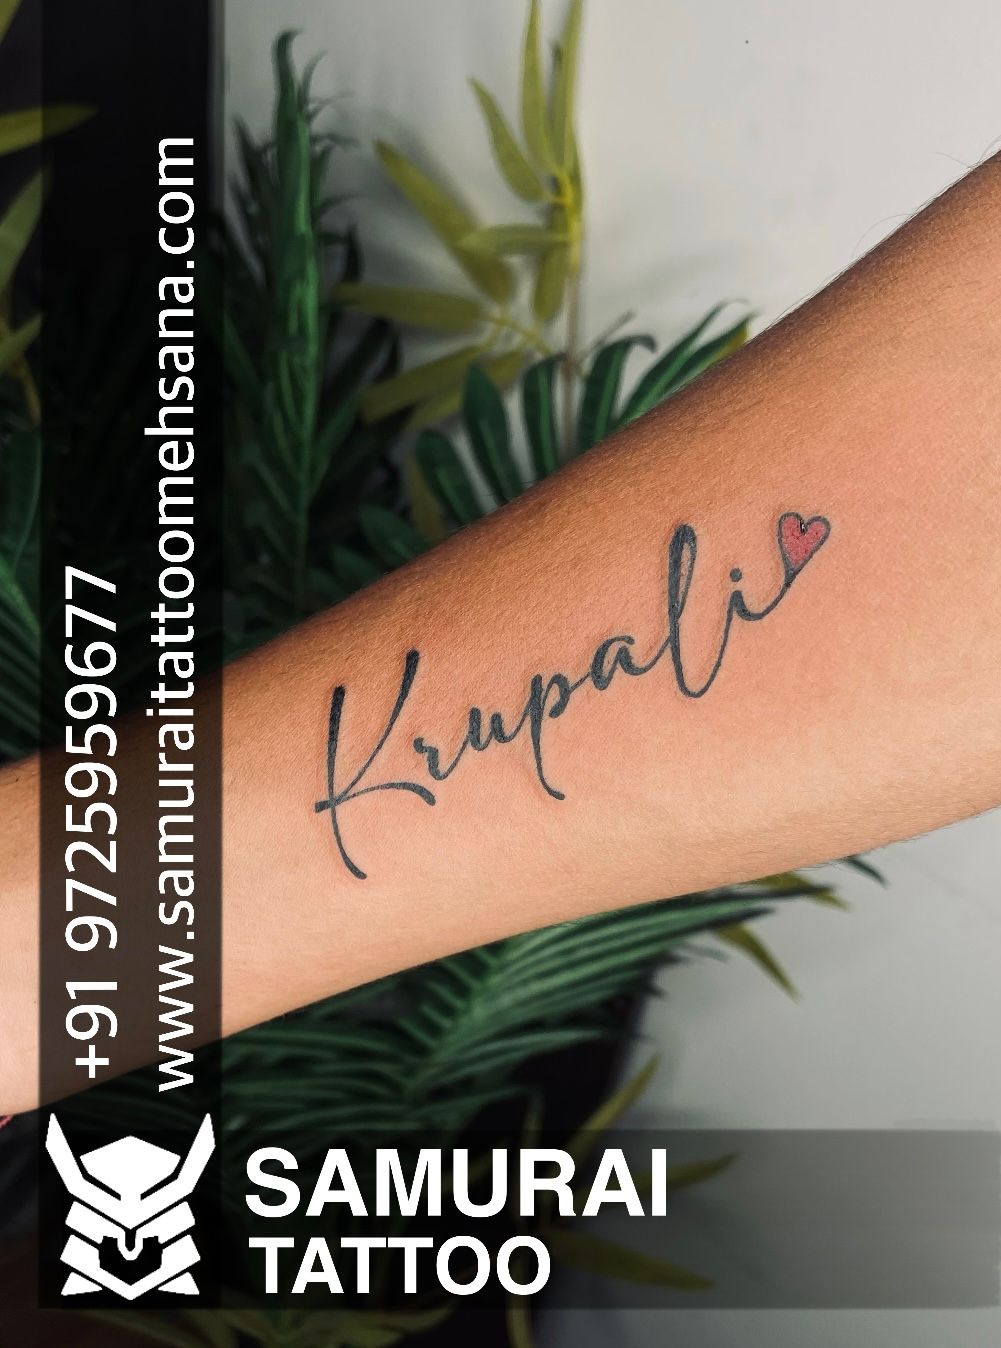 CrispyAura  Fine Line Tattoos Chicago  on Instagram 𝙼𝚊𝚑𝚊𝚕 𝙺𝚒𝚝𝚊   Marking beginning of the journey This is the first tattoo I ever did on  someone  tysm chescaisabel for trusting